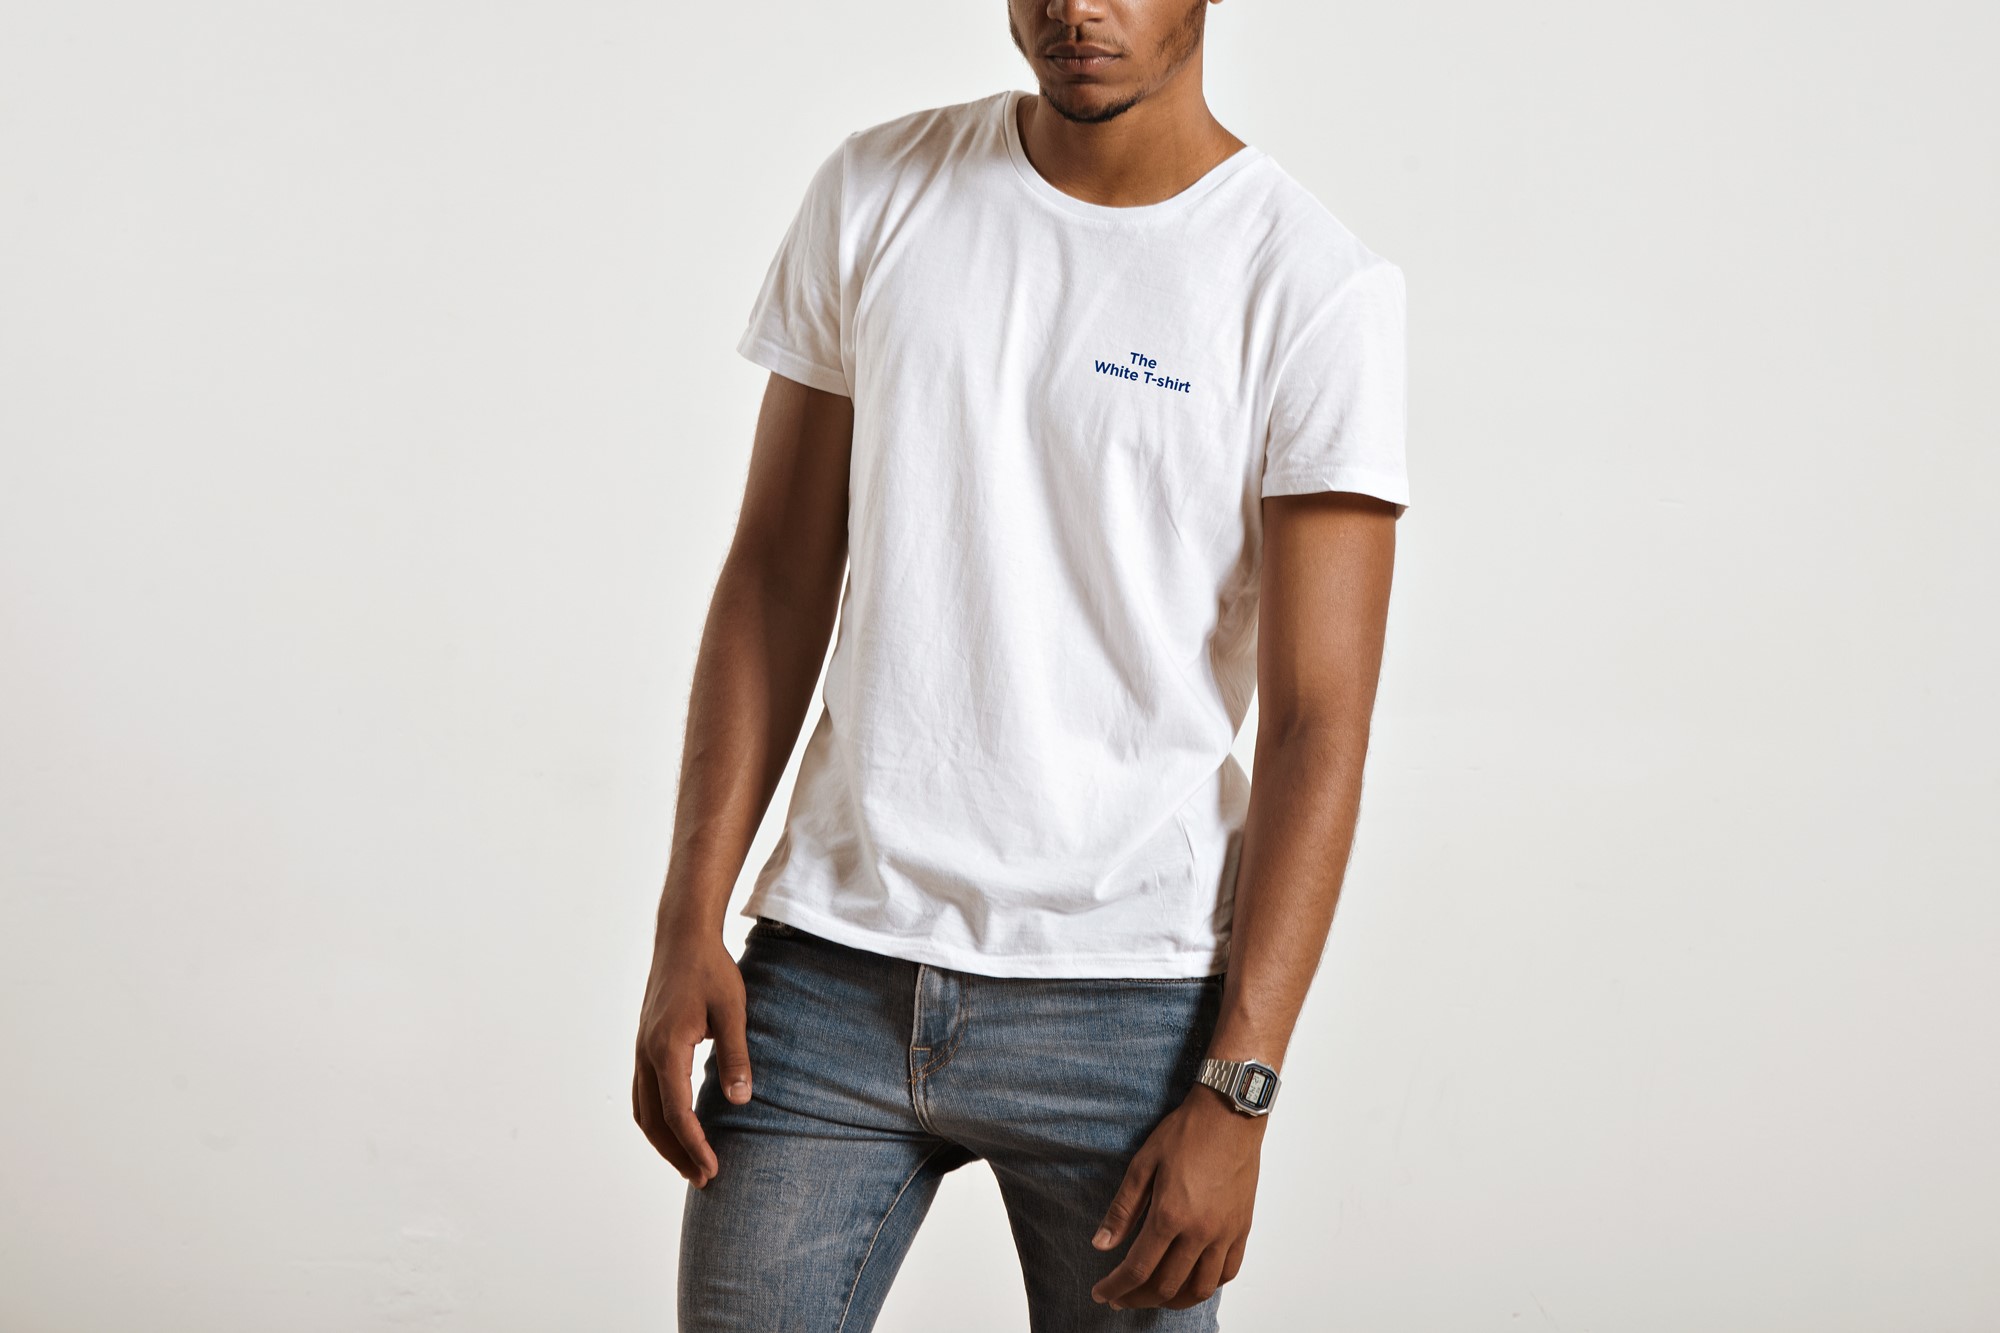 model wearing a white t-shirt. Front view